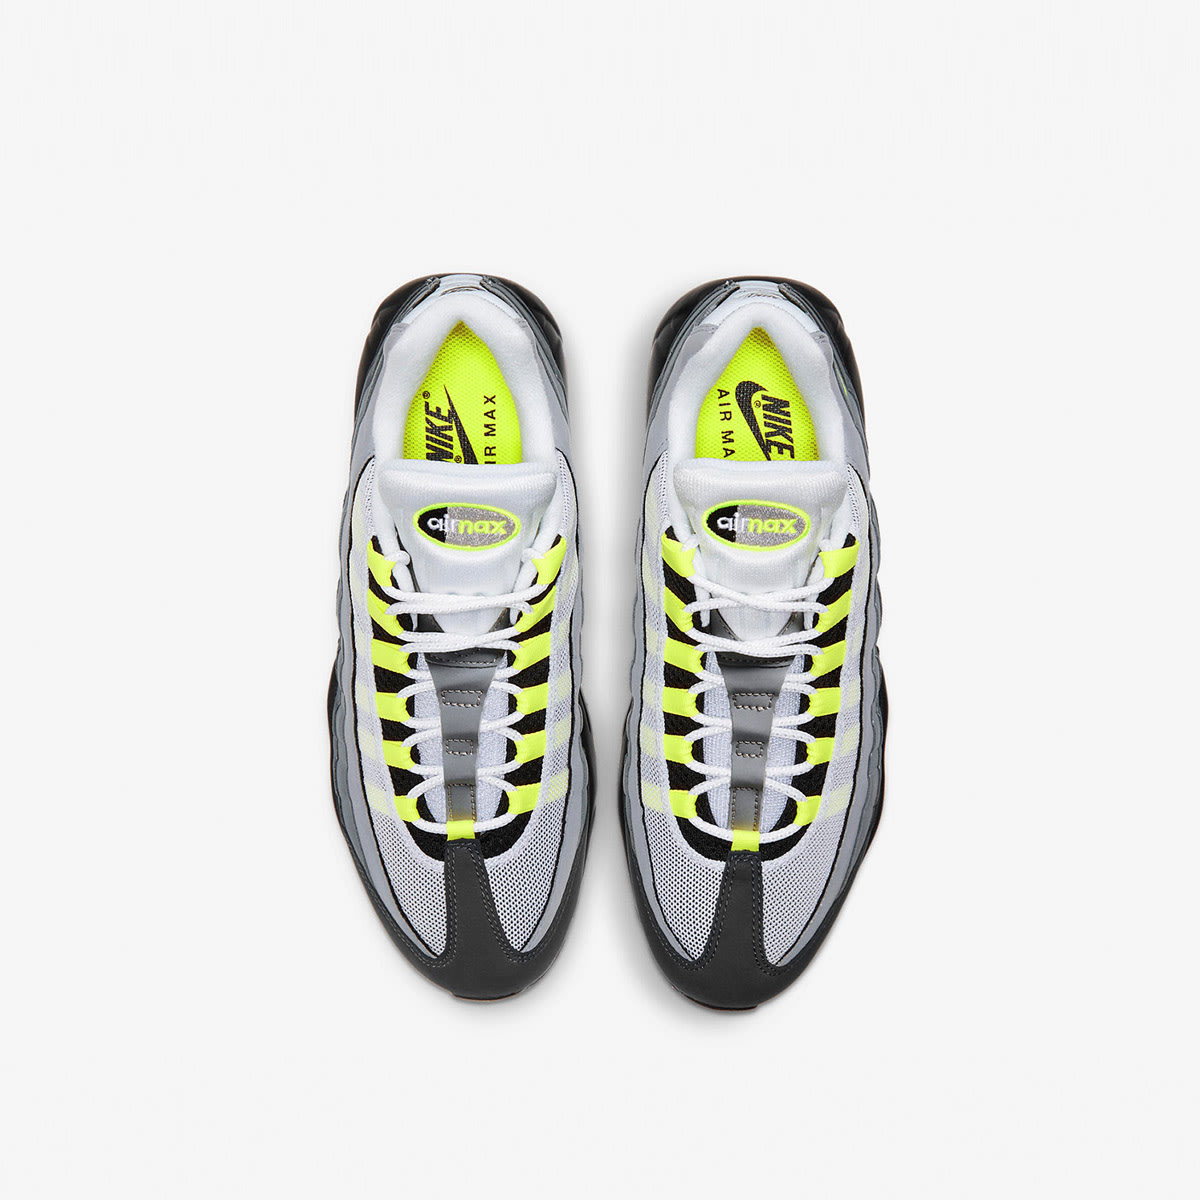 Nike Air Max 95 OG (Black, Yellow & Anthracite) | END. Launches